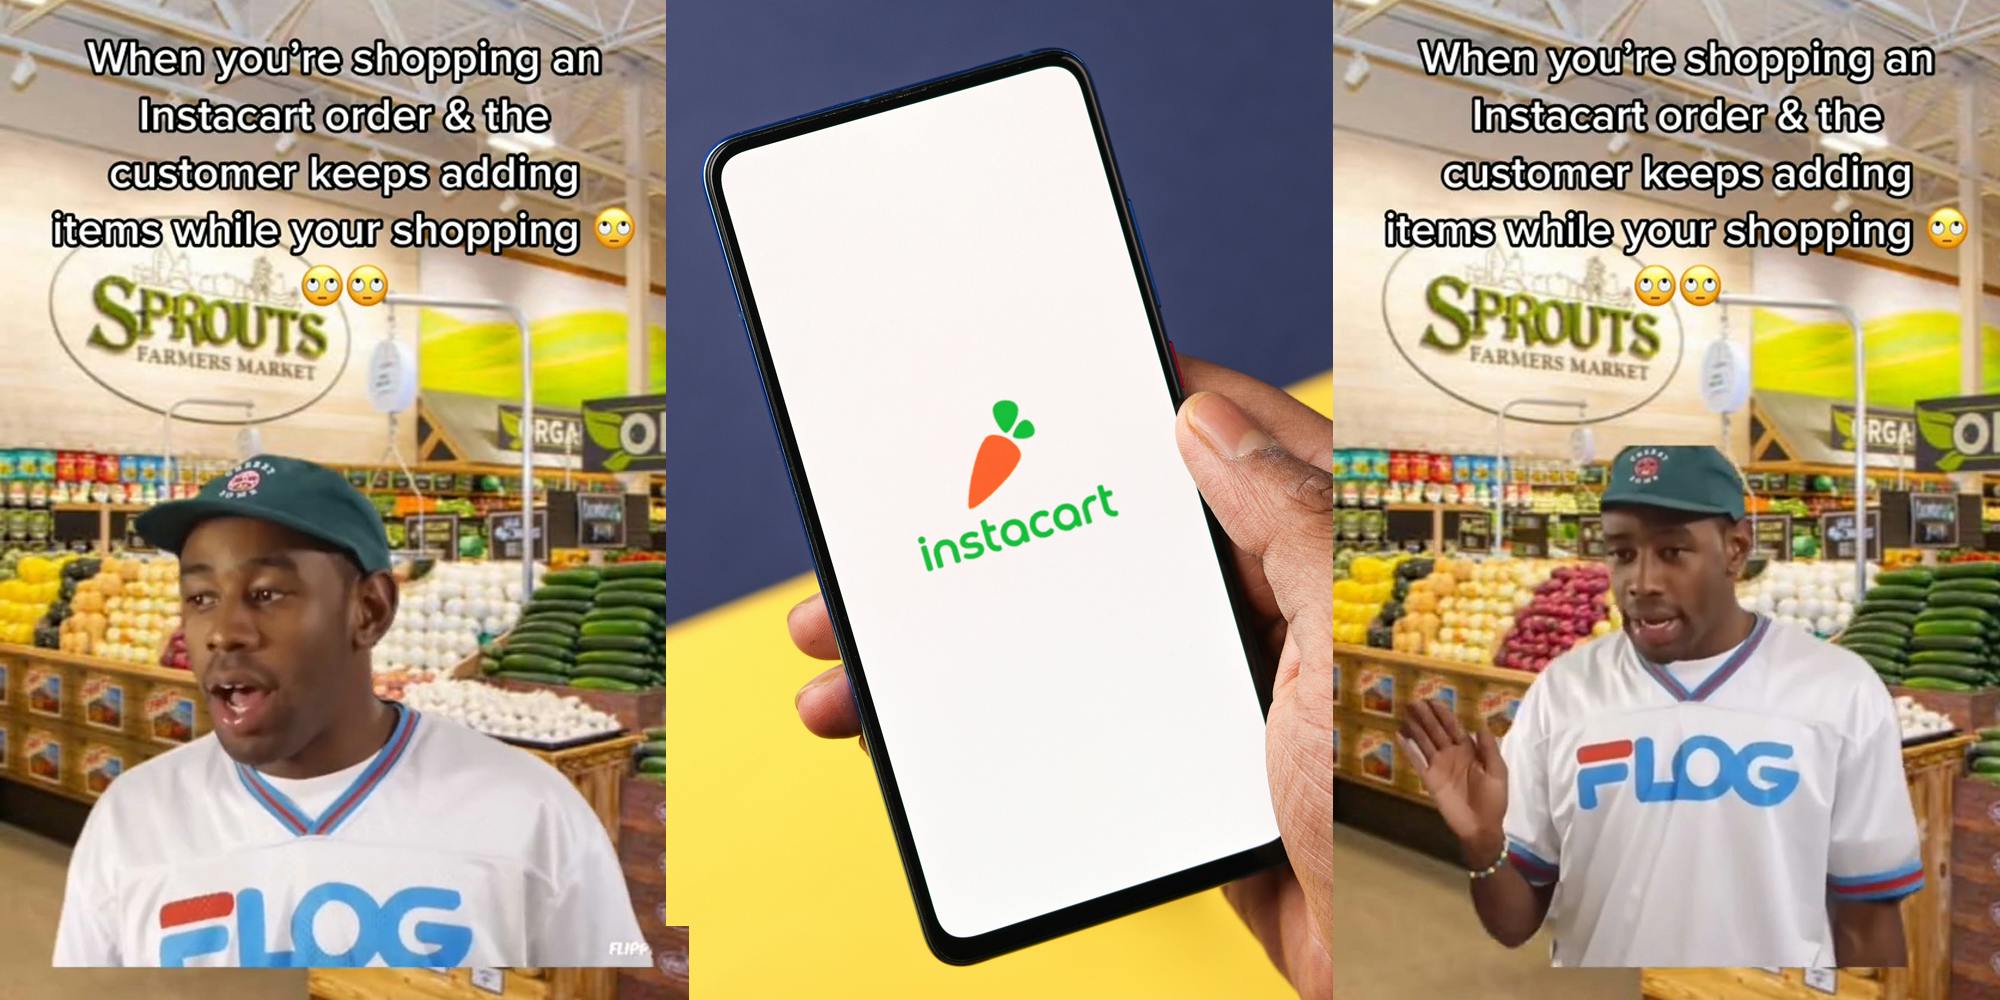 Tyler the Creator meme over image of Sprout's interior with caption "When you're shopping an Instacart order & the customer keeps adding items while your shopping" (l) Instacart on phone screen in hand in front of purple to yellow diagonal split background (c) Tyler the Creator meme over image of Sprout's interior with caption "When you're shopping an Instacart order & the customer keeps adding items while your shopping" (r)